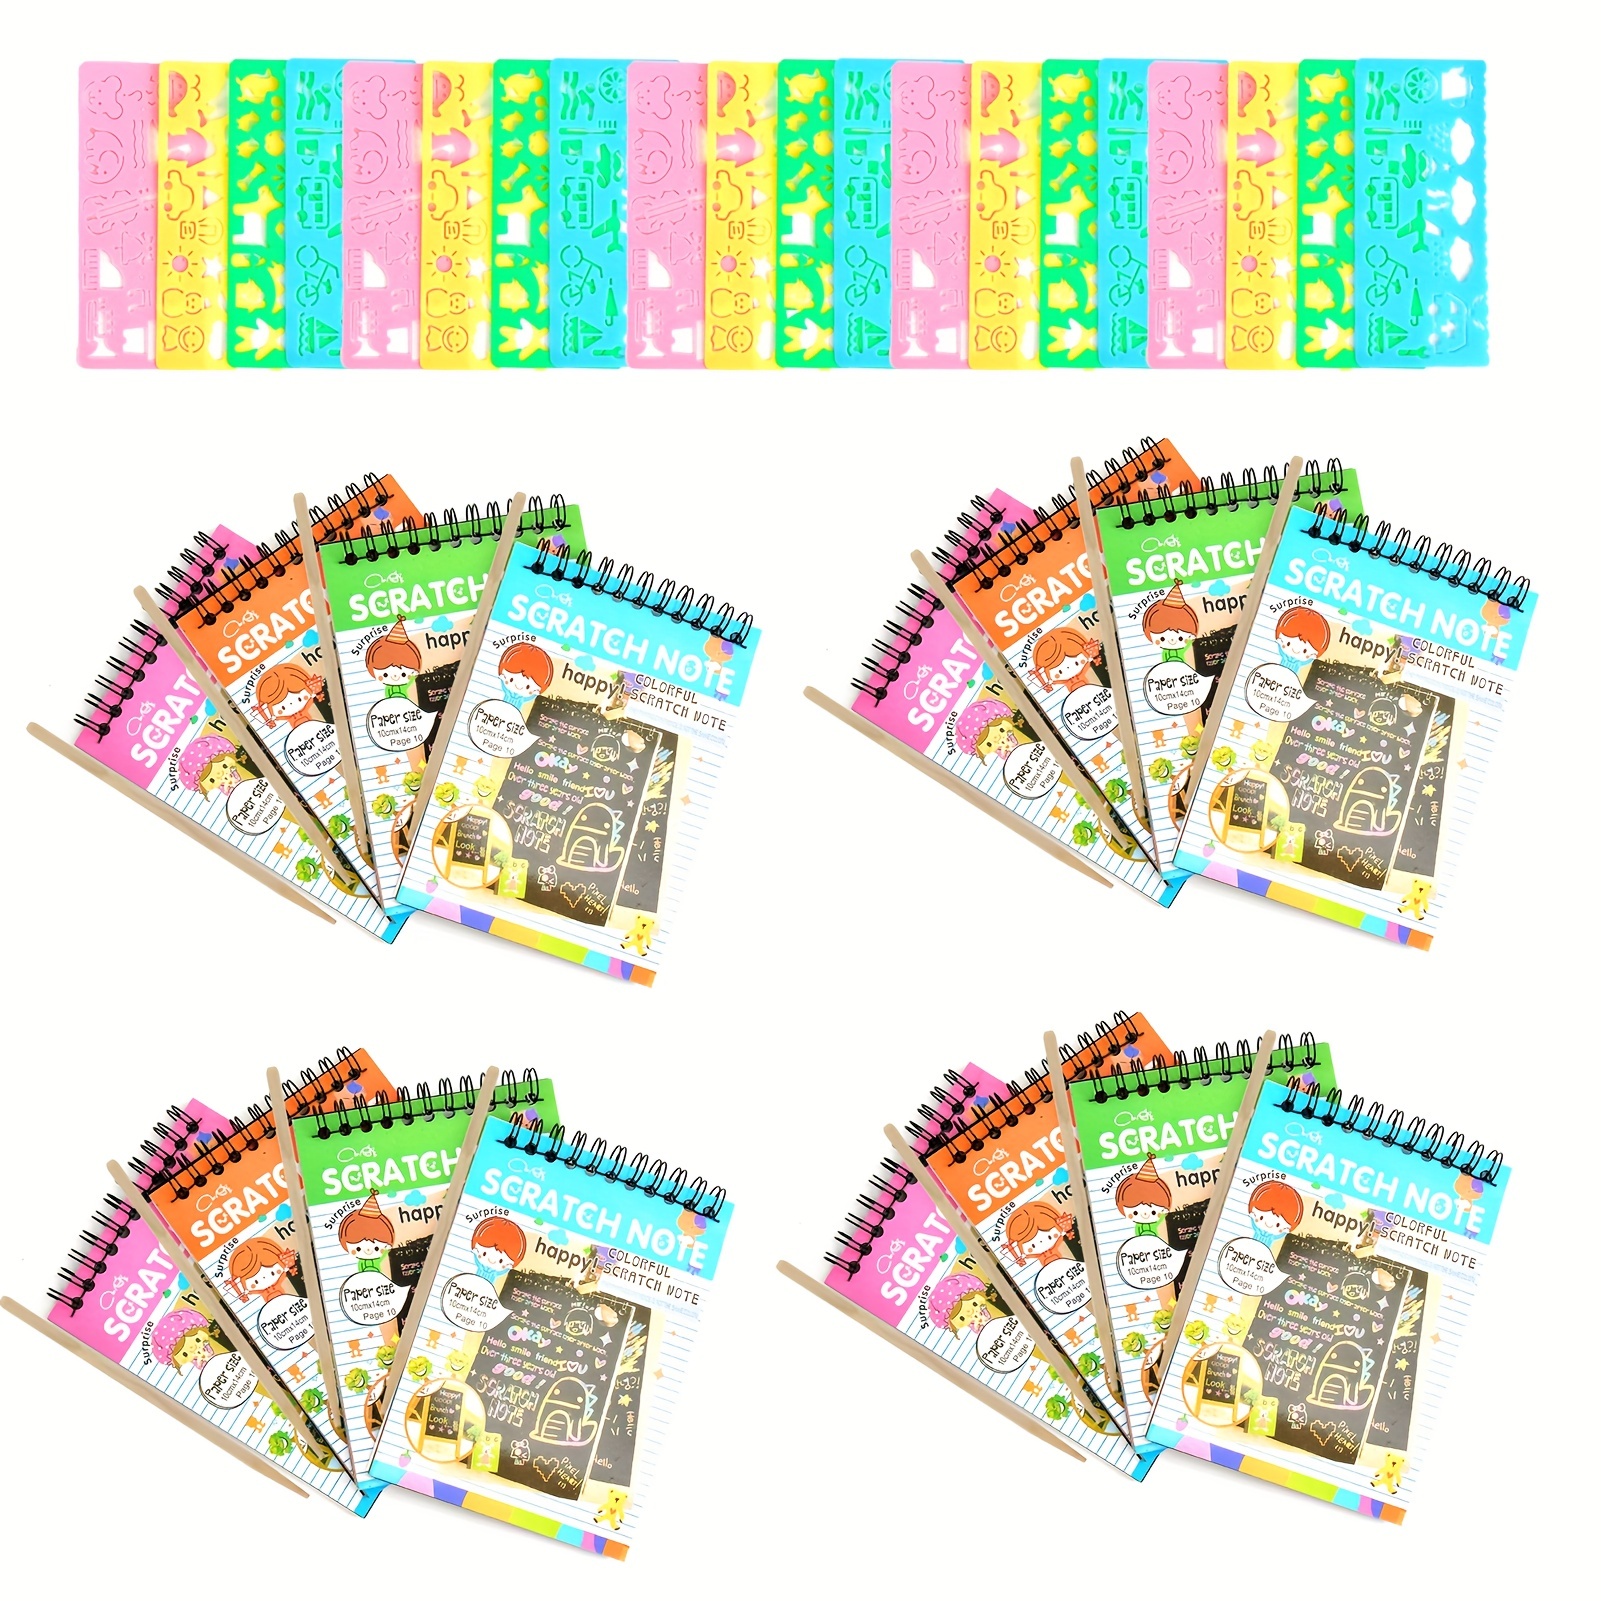 16 Pack Scratch Arts and Crafts Notebooks Scratch Note Pads for Kids  Includeing 4 Drawing Stencils and 16 Wooden Stylus Scratch Paper for Kids Art  Party Supplies Stocking Stuffers